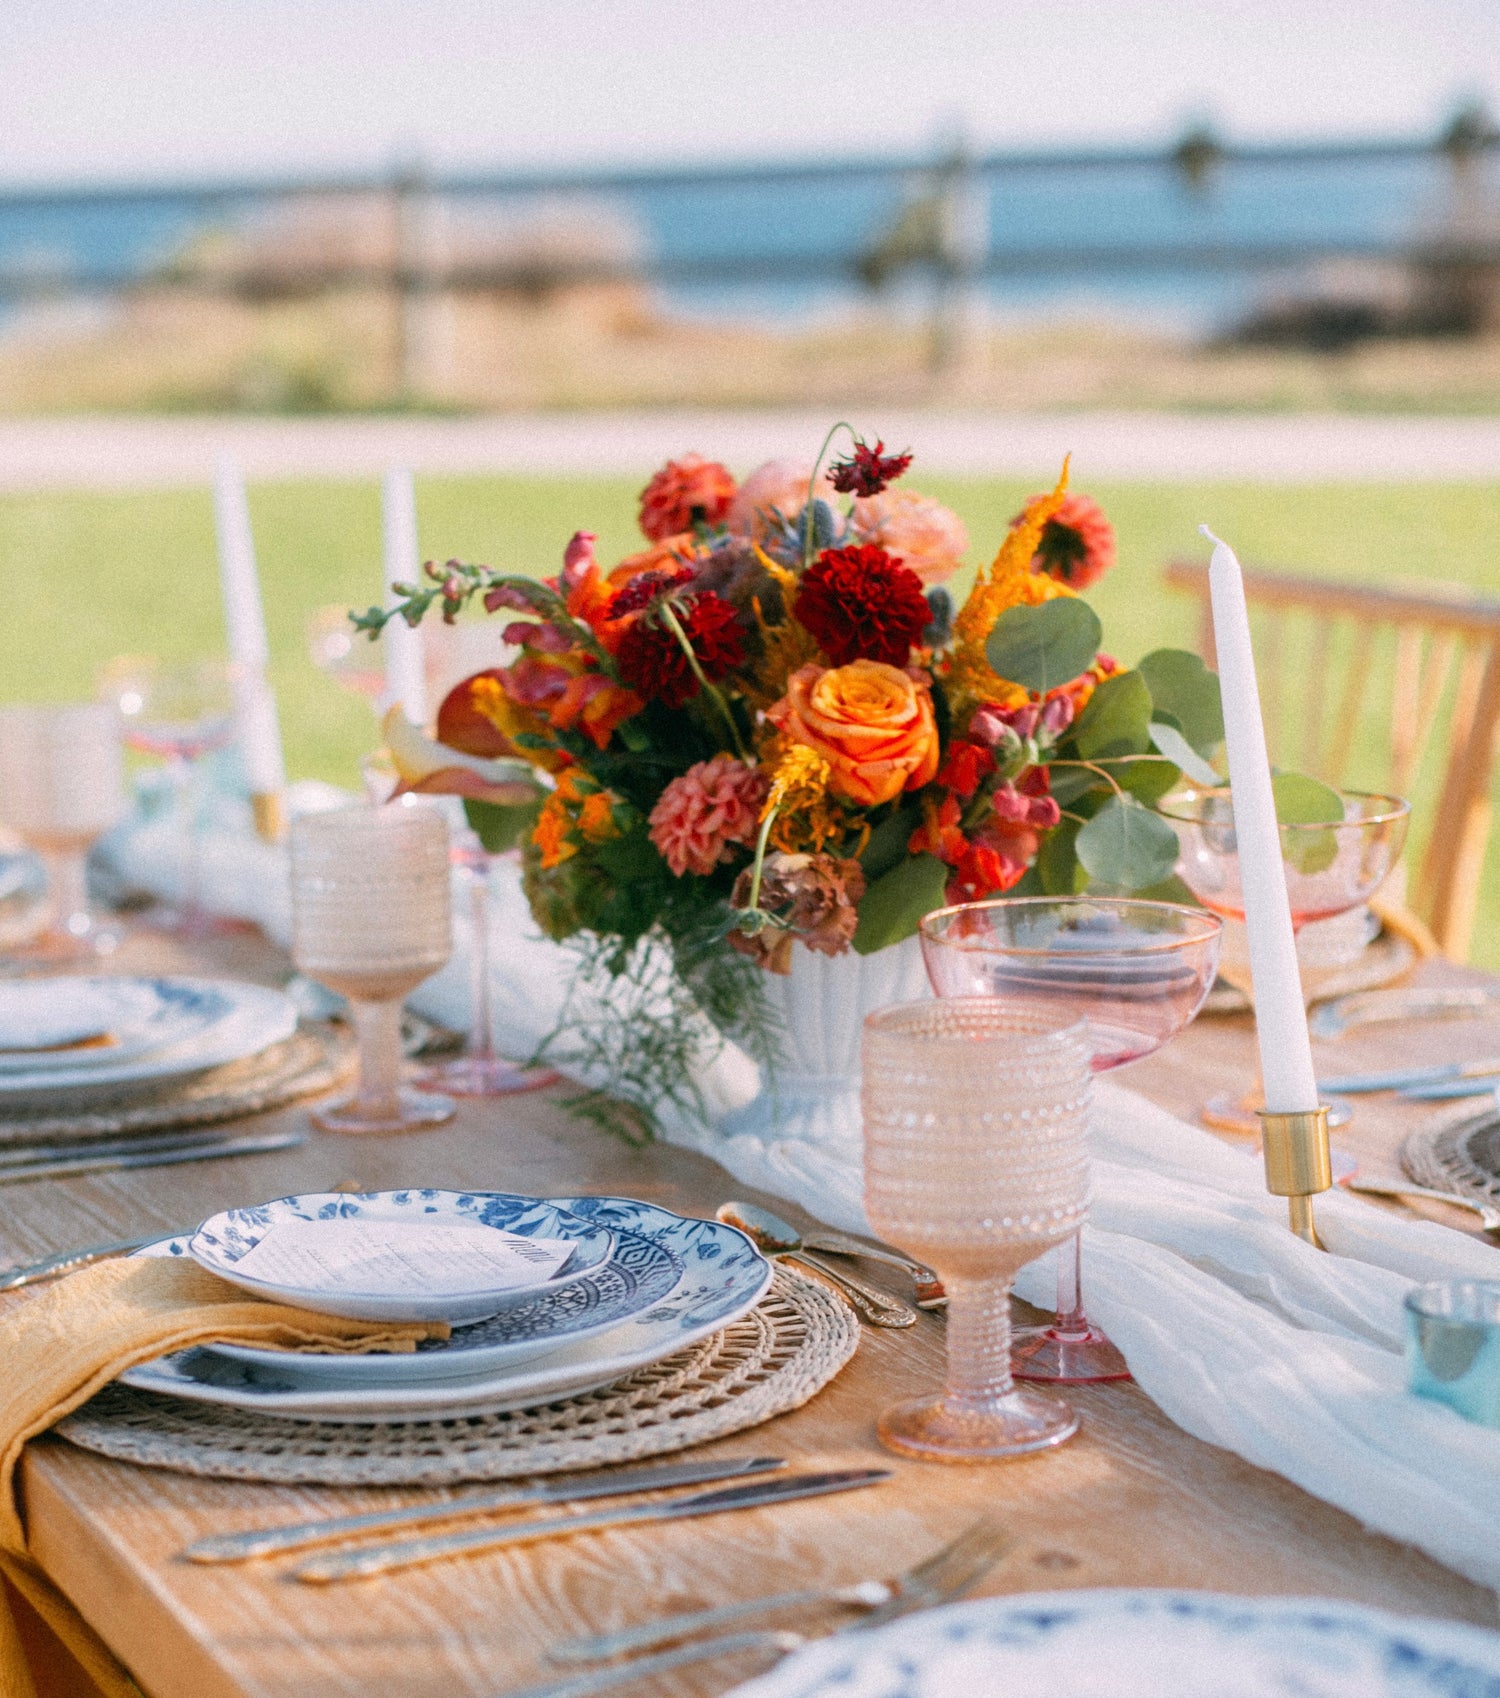 Colorful Centerpiece Flowers and table setting for Special Event in Santa Barbara